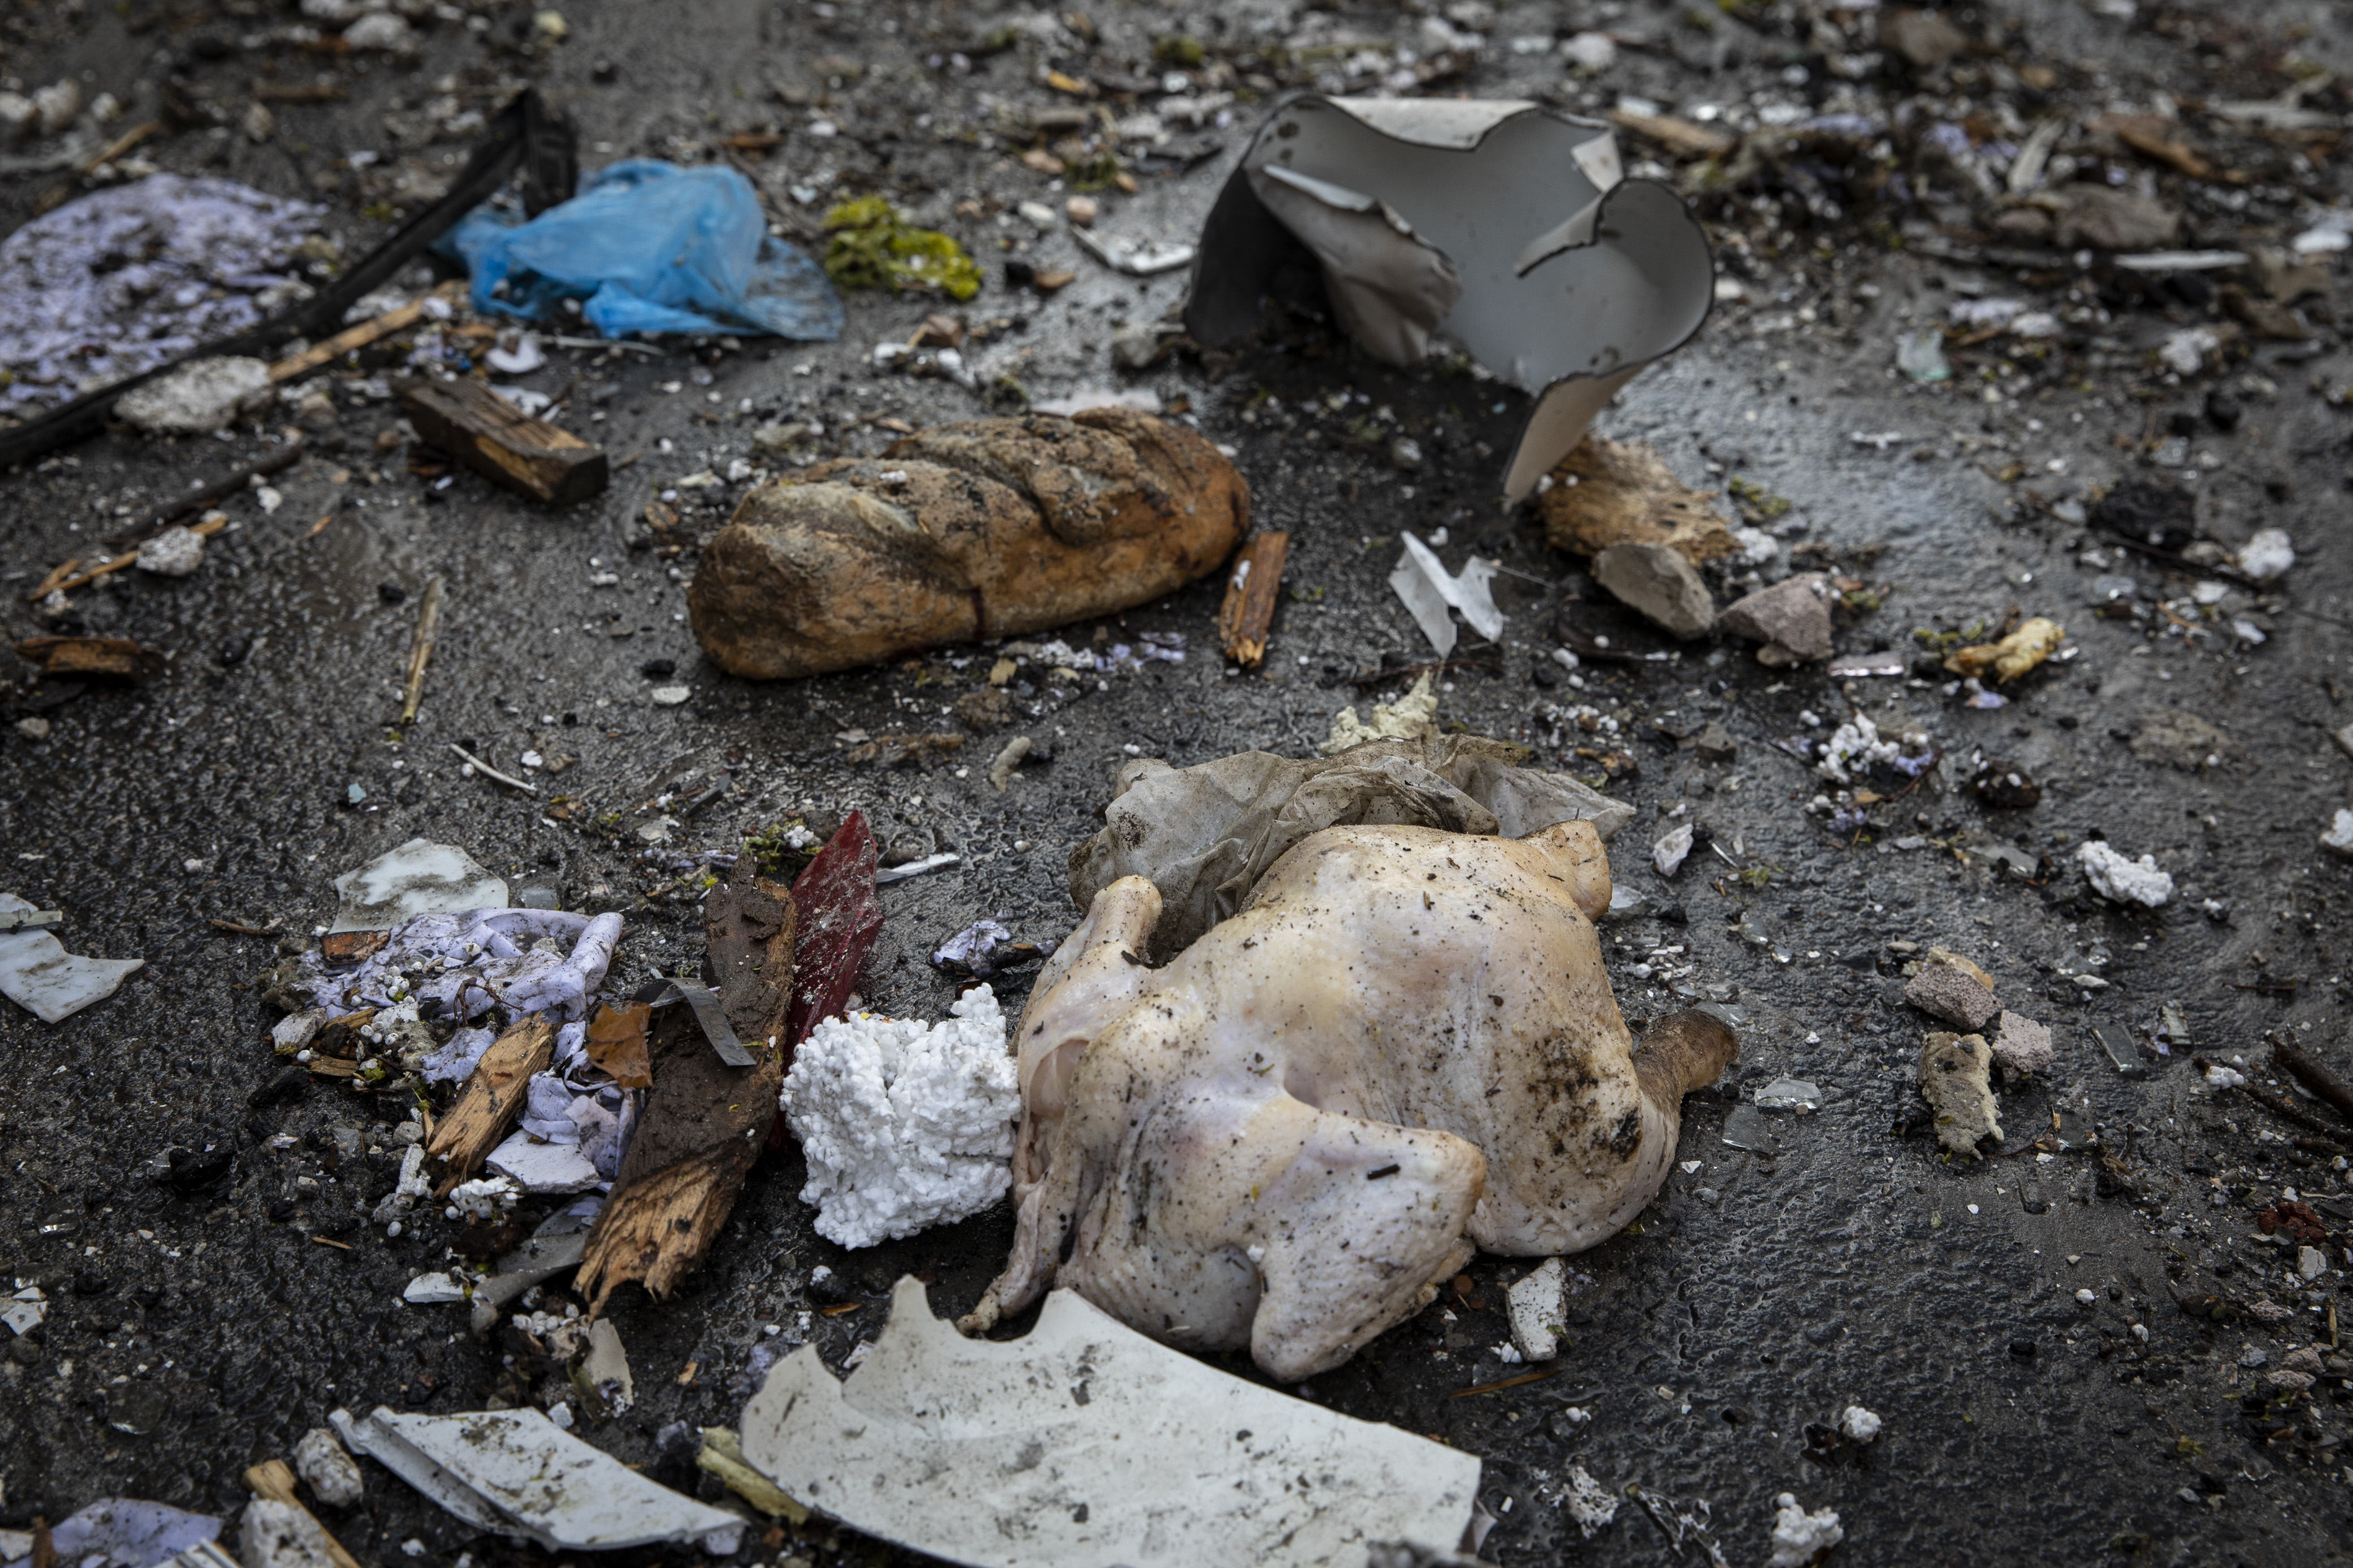 &nbsp;A chicken and pieces of bread seen in the debris caused by a Russian airstrike in Kharkiv.